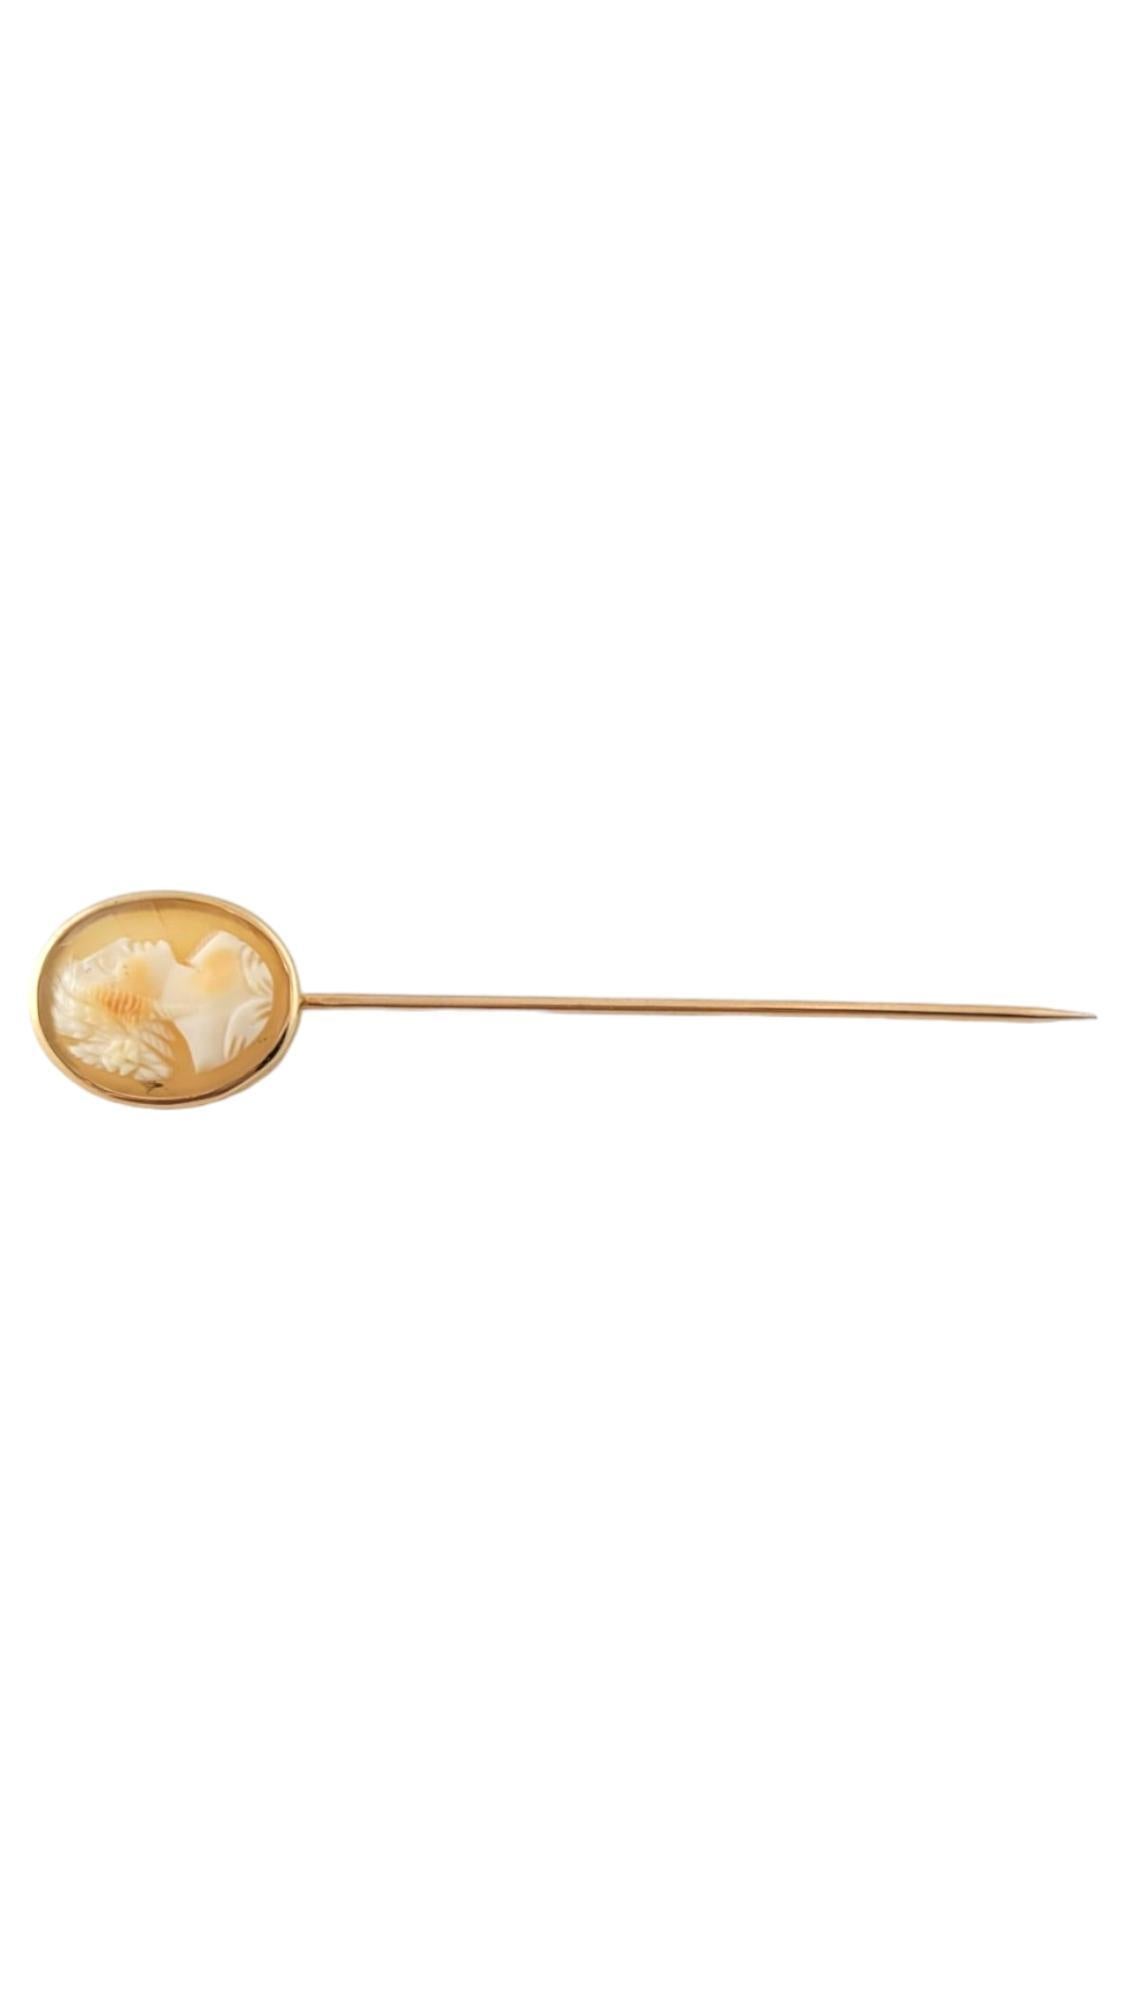 Vintage 14K Yellow Gold Cameo Stick Pin

This beautiful cameo stick pin is crafted from 14K gold and would look great on anyone!

Pin length: 64.5mm
Cameo size: 16.54mm X 13.2mm X 5.5mm

Weight: 1.0 dwt/ 1.6 g

Tested 10K

Very good condition,